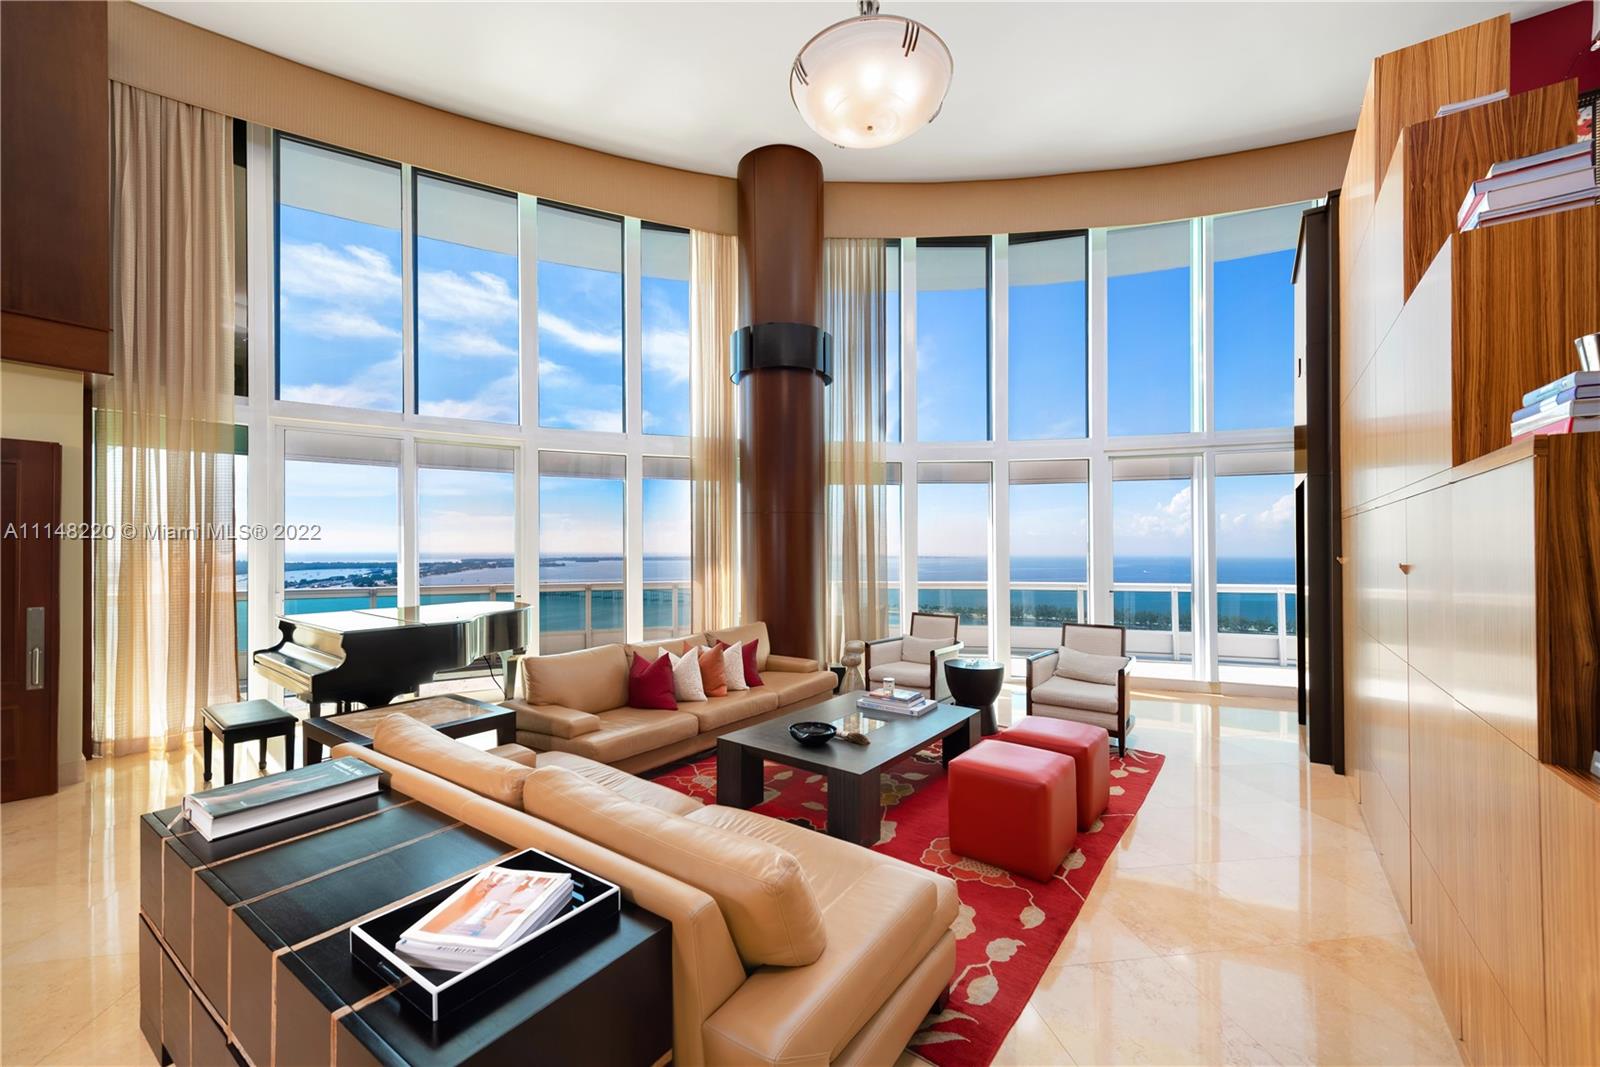 This home in the sky at the exclusive Santa Maria building features 5,733 sqft + 1742 sqft of expansive terraces with unobstructed views of the Ocean, Bay and Miami Skyline. Flow-through 2 story unit features a private foyer, soaring 20ft ceilings, solid mahogany doors, and electric shutters. This home has a custom sound proof theater and all blackout electric blinds. Amenities include state of the art fitness center, tennis court, pool, spa & Storage.